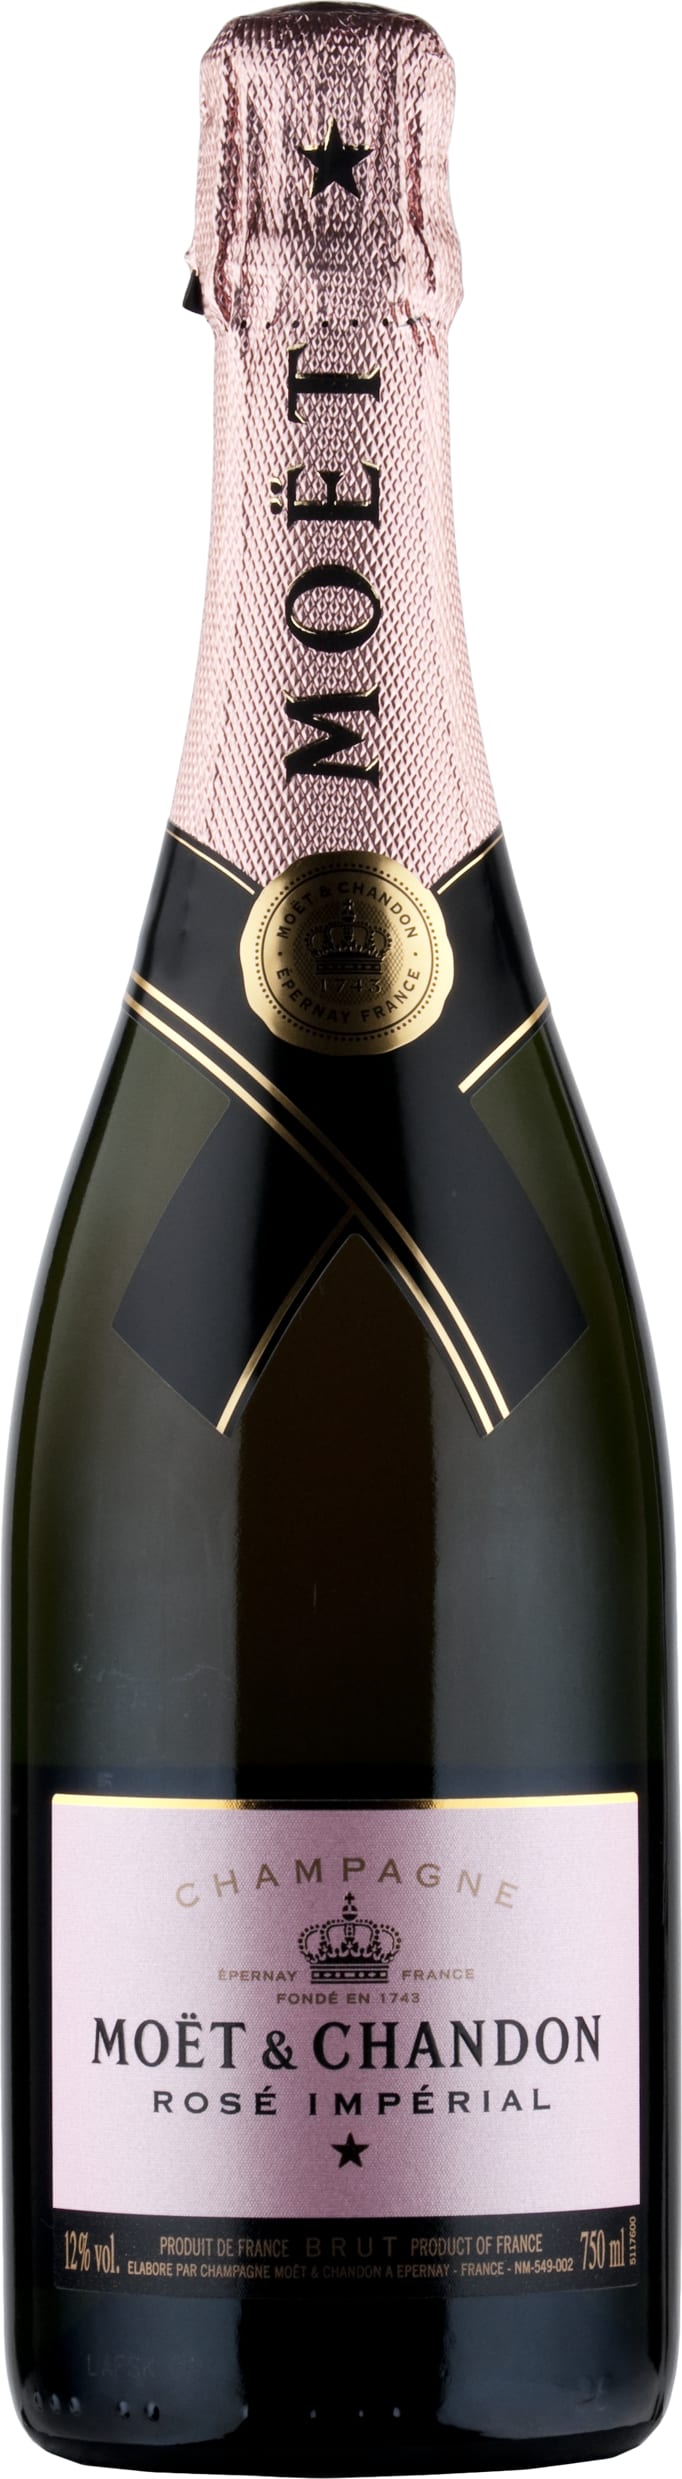 Moet and Chandon Rose Imperial Magnum 150cl NV - Buy Moet and Chandon Wines from GREAT WINES DIRECT wine shop